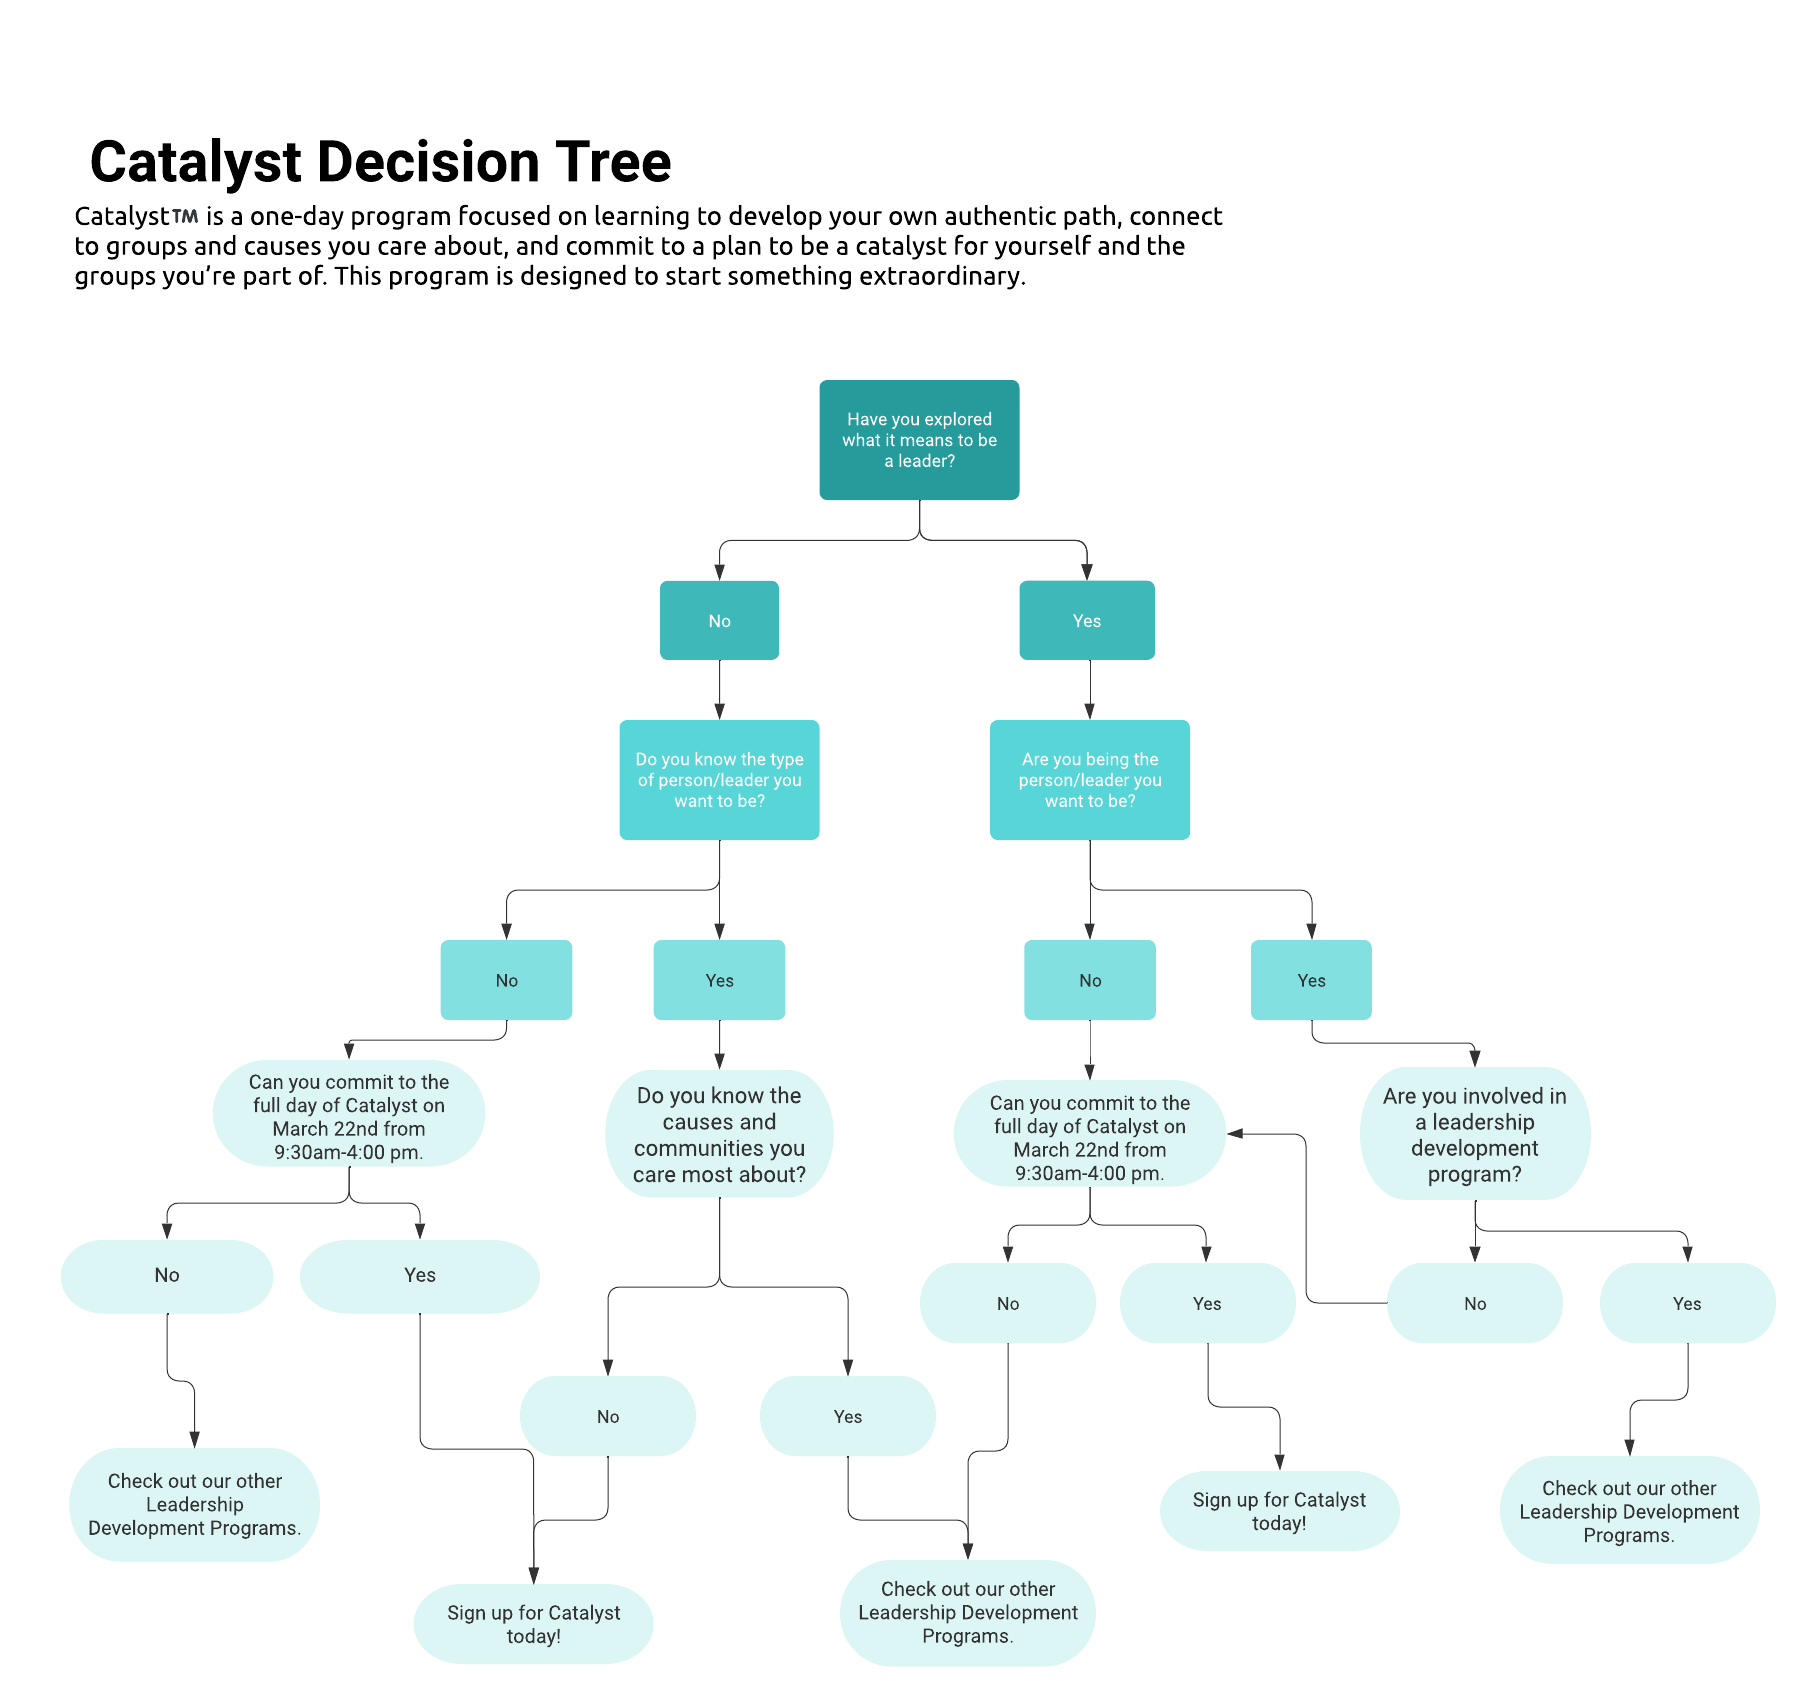 Is Catalyst right for you? This image of a decision tree helps one decide.